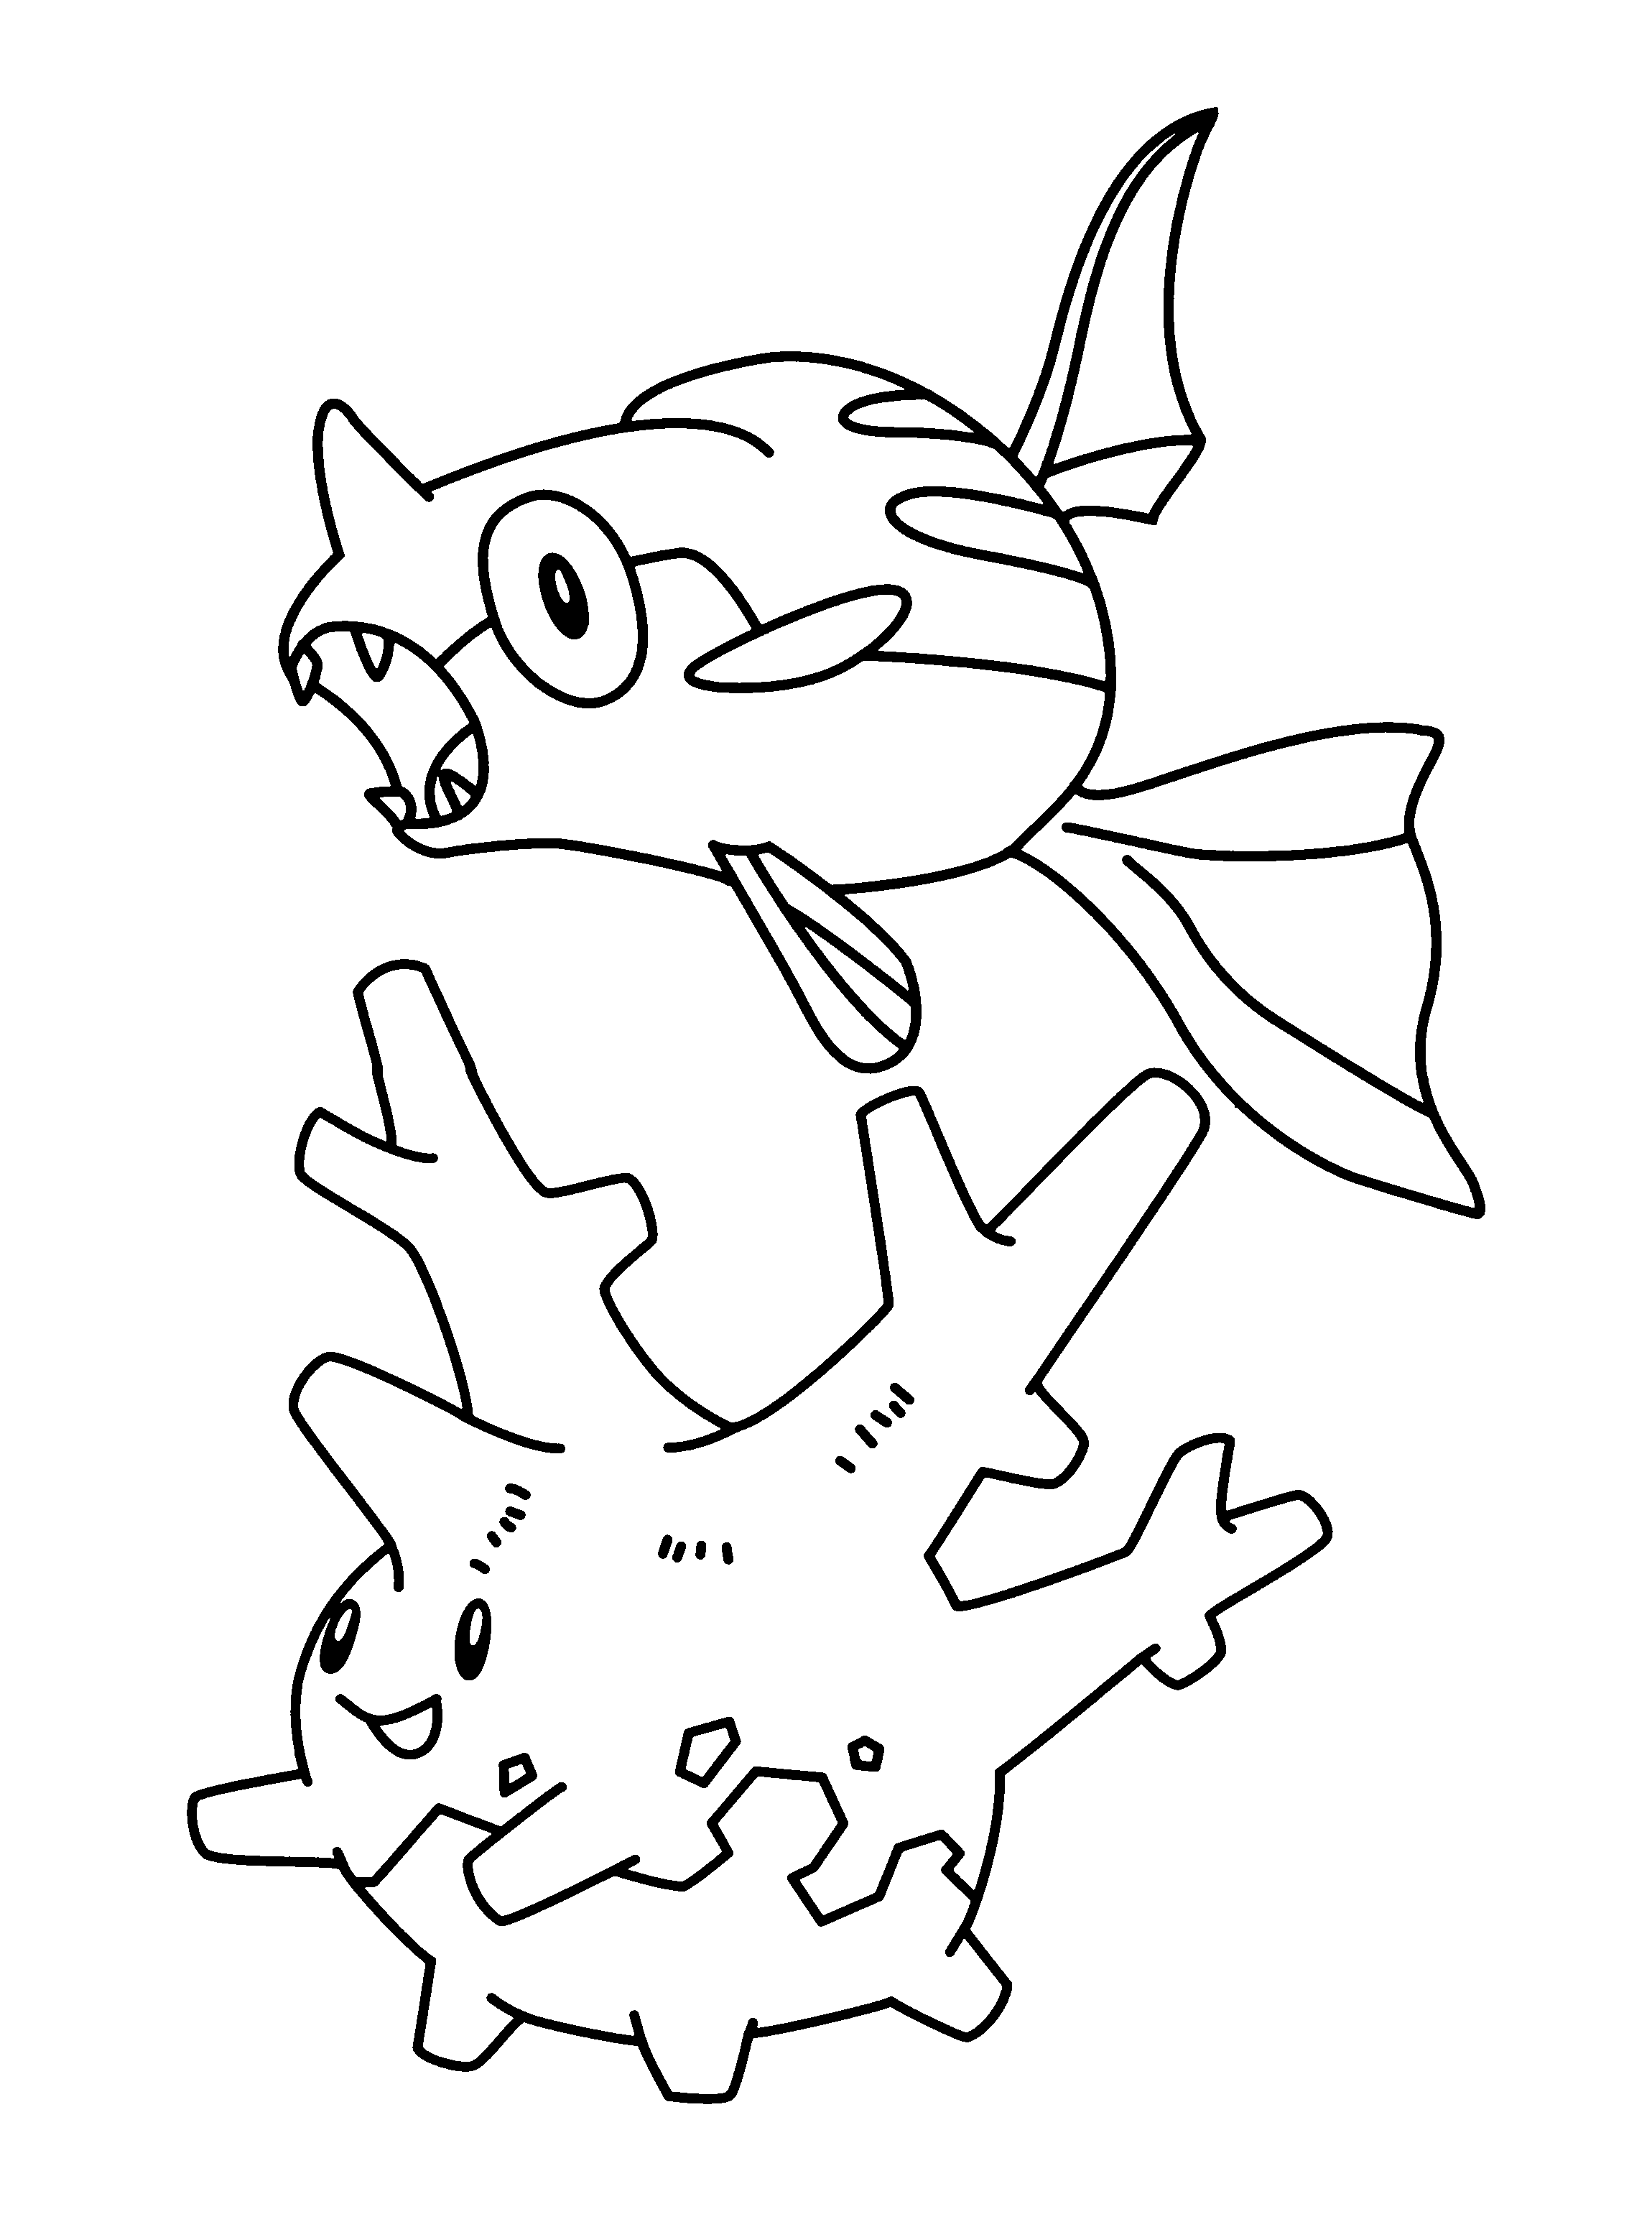 animated-coloring-pages-pokemon-image-0426